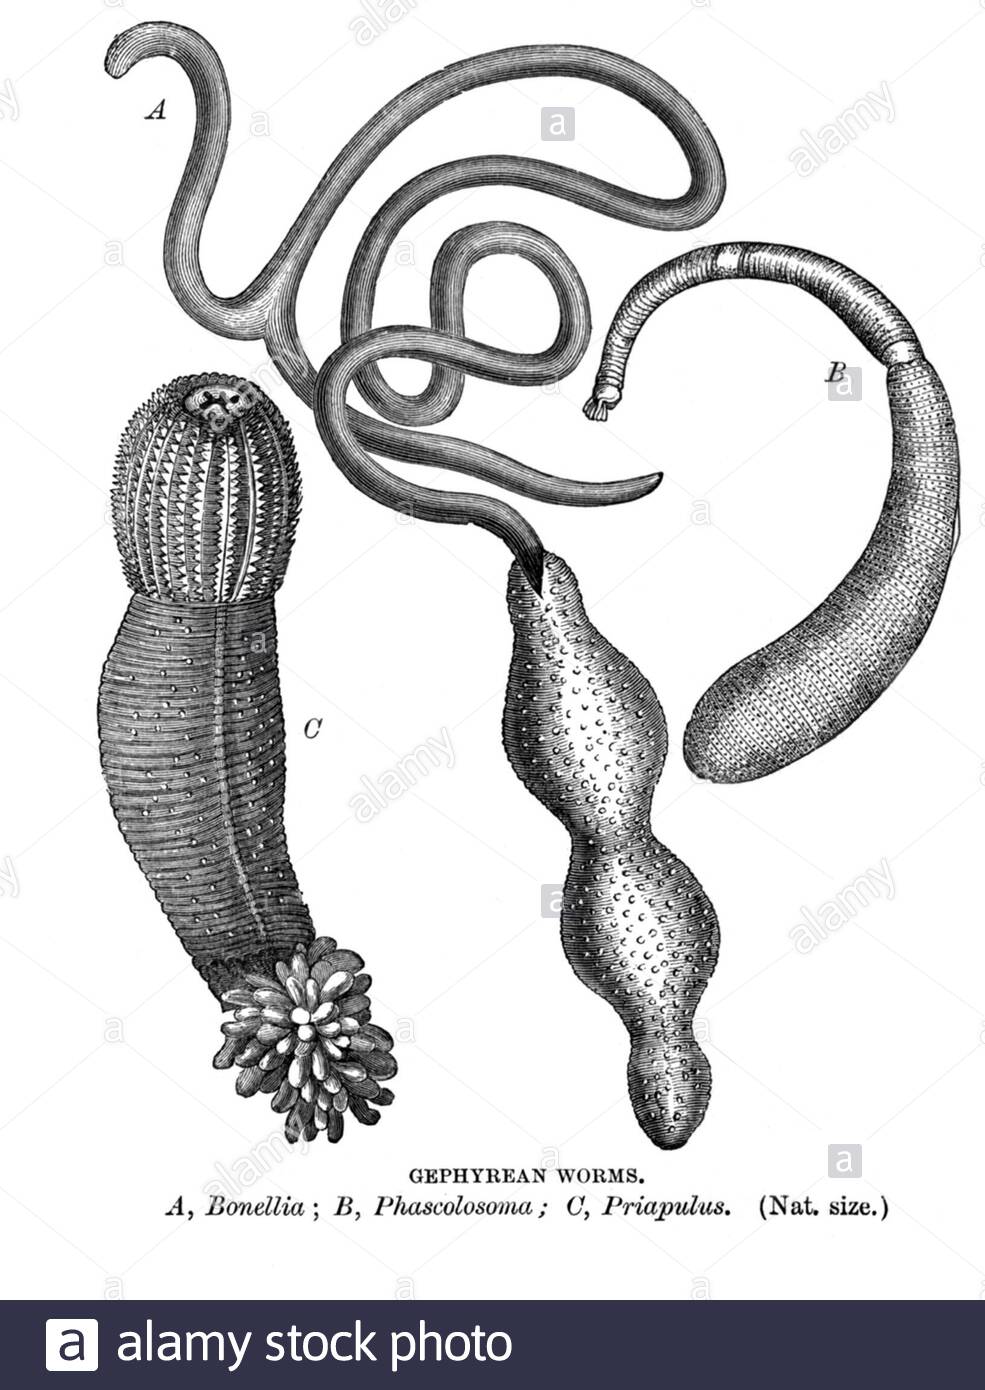 Gephyrean Worms, vintage illustration from 1896 Stock Photo